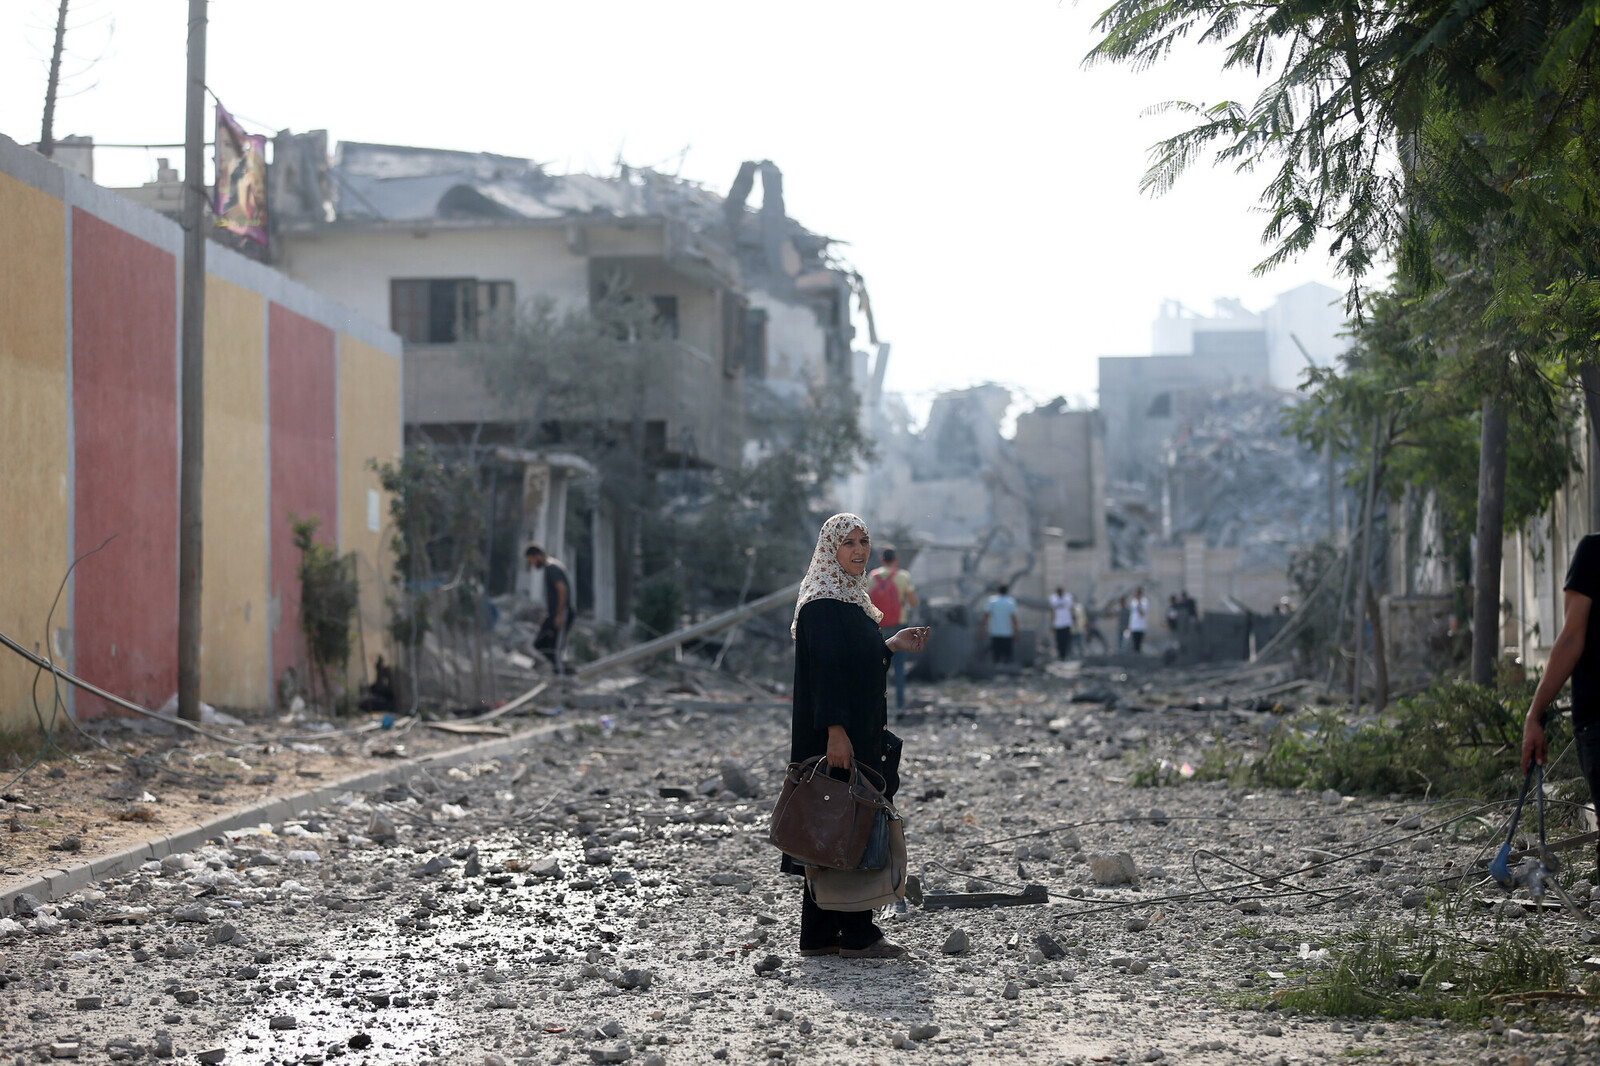 DESCRIPTIONA Palestinian woman stands in the middle of the massive destruction caused by Israeli airstrikes in Gaza City